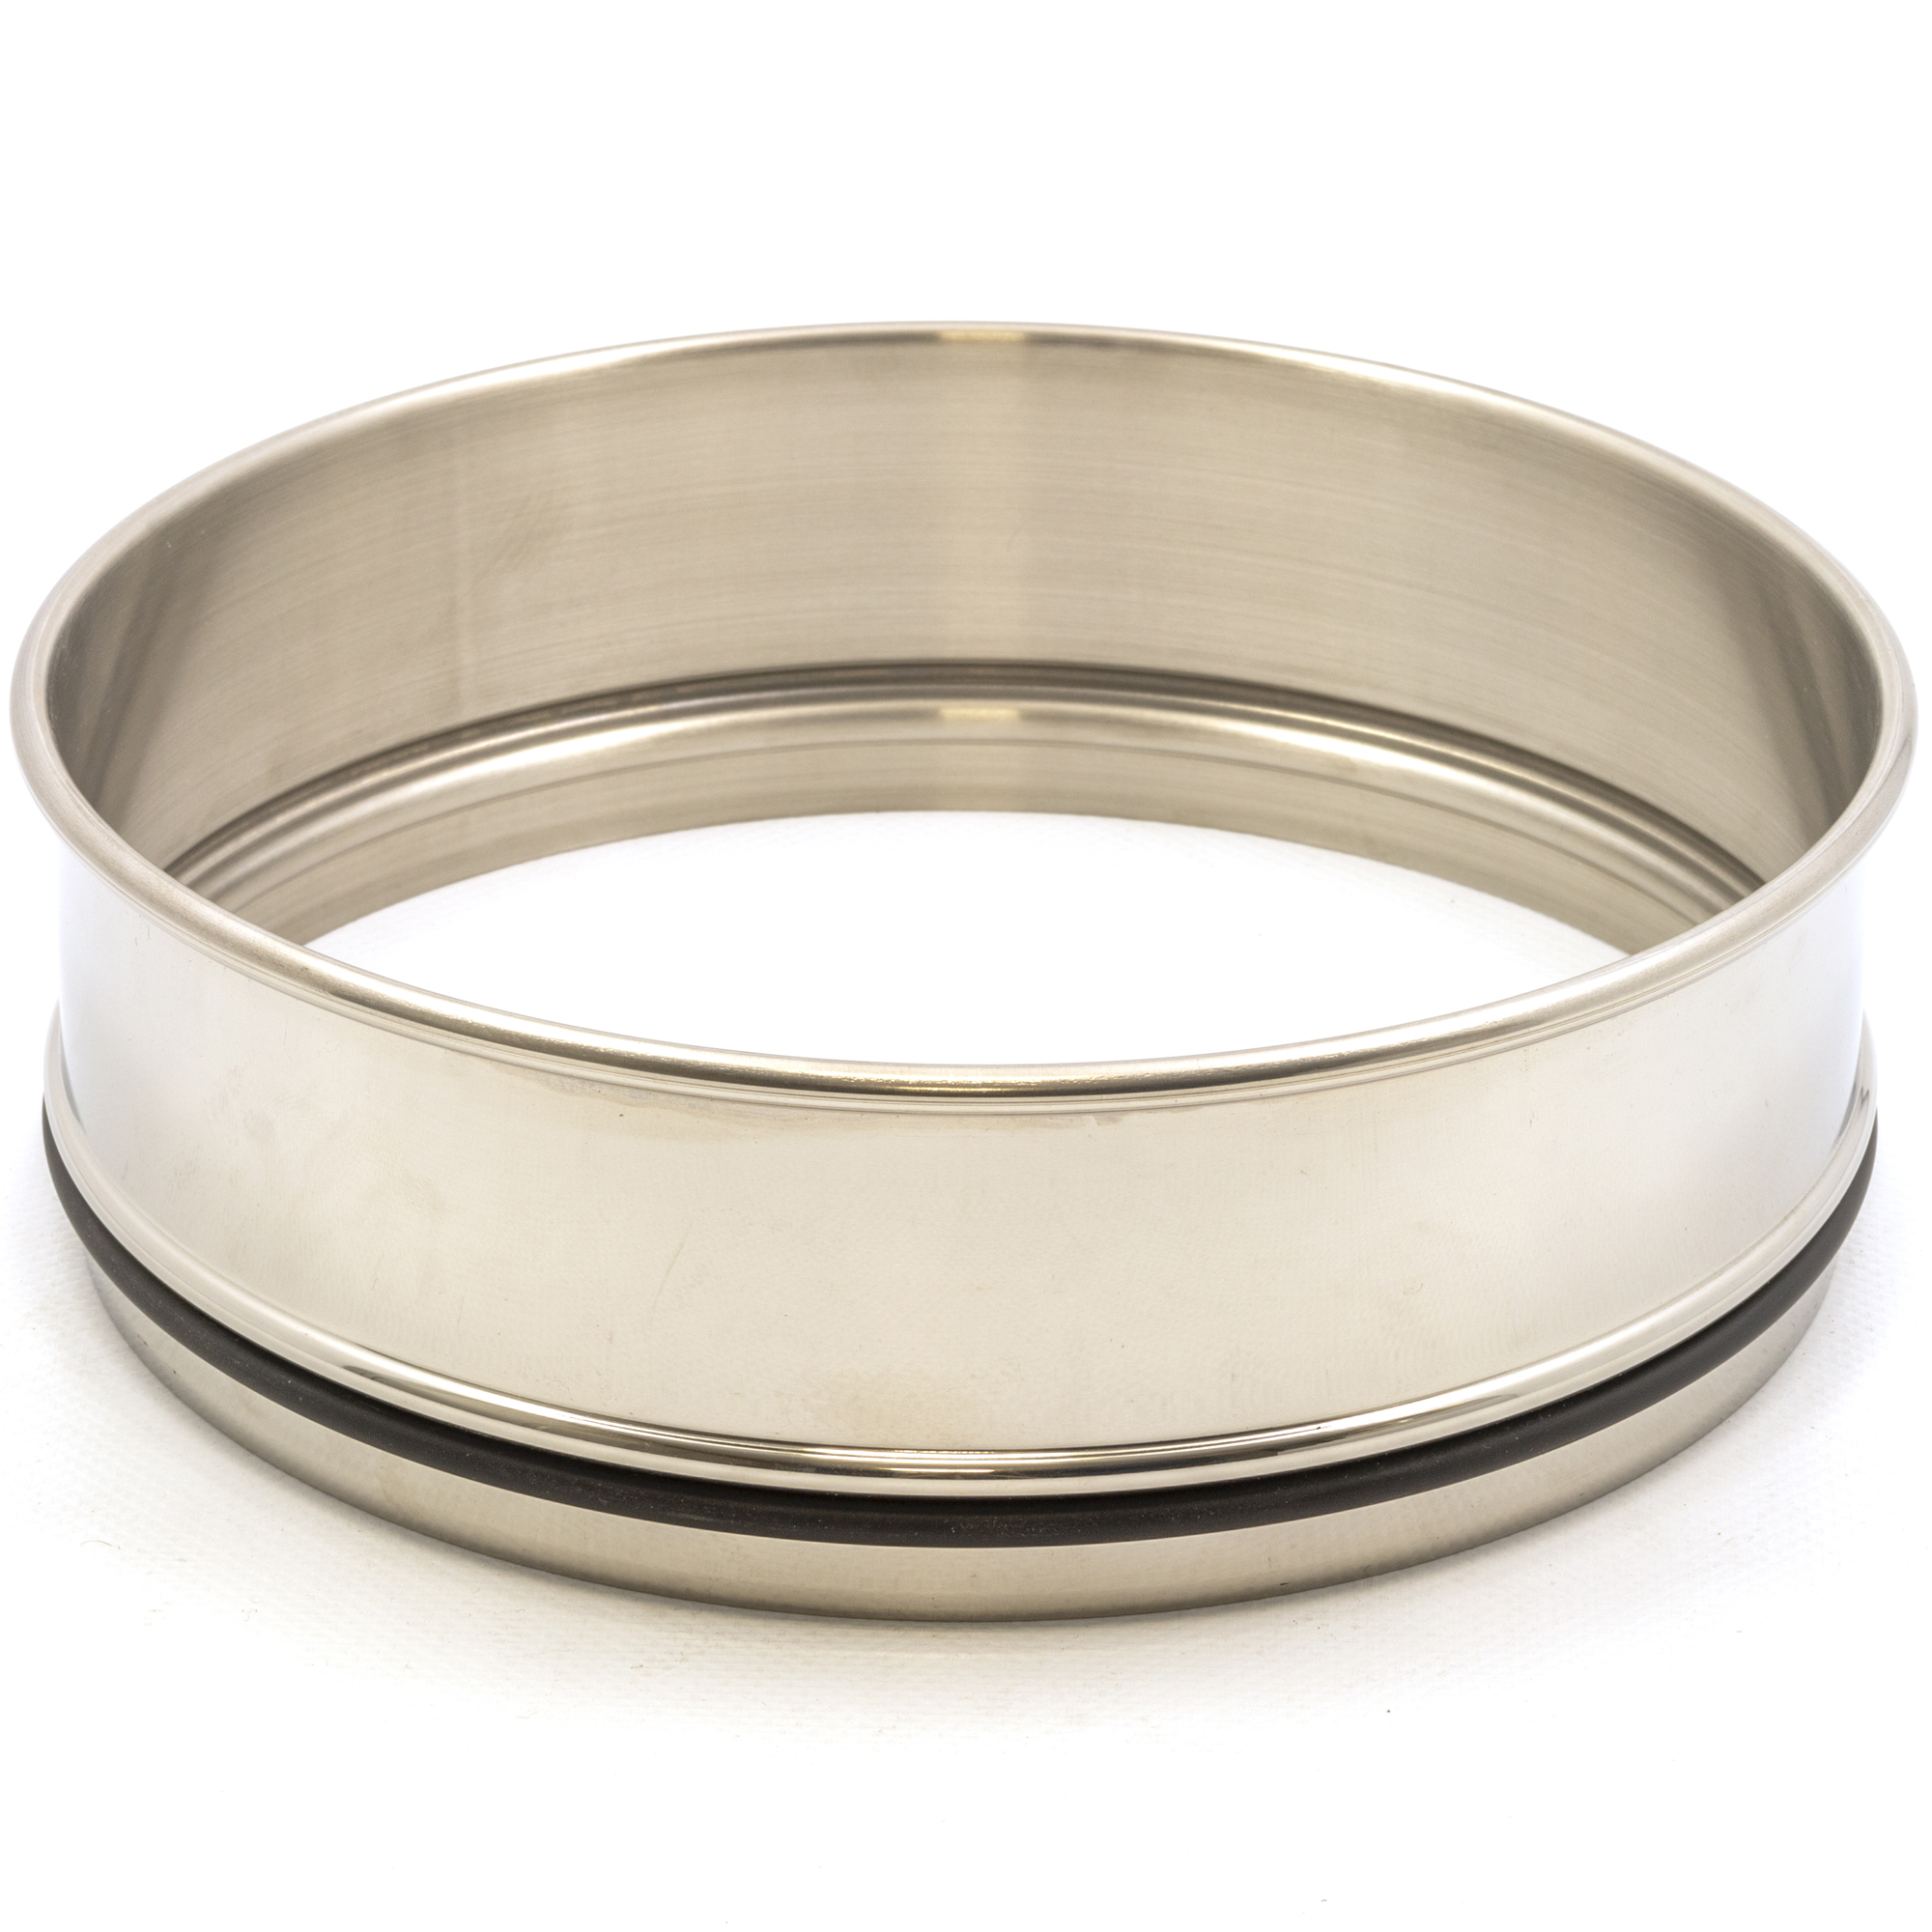 HAVE 205923876 Intermediate ring for 200x50mm sieves